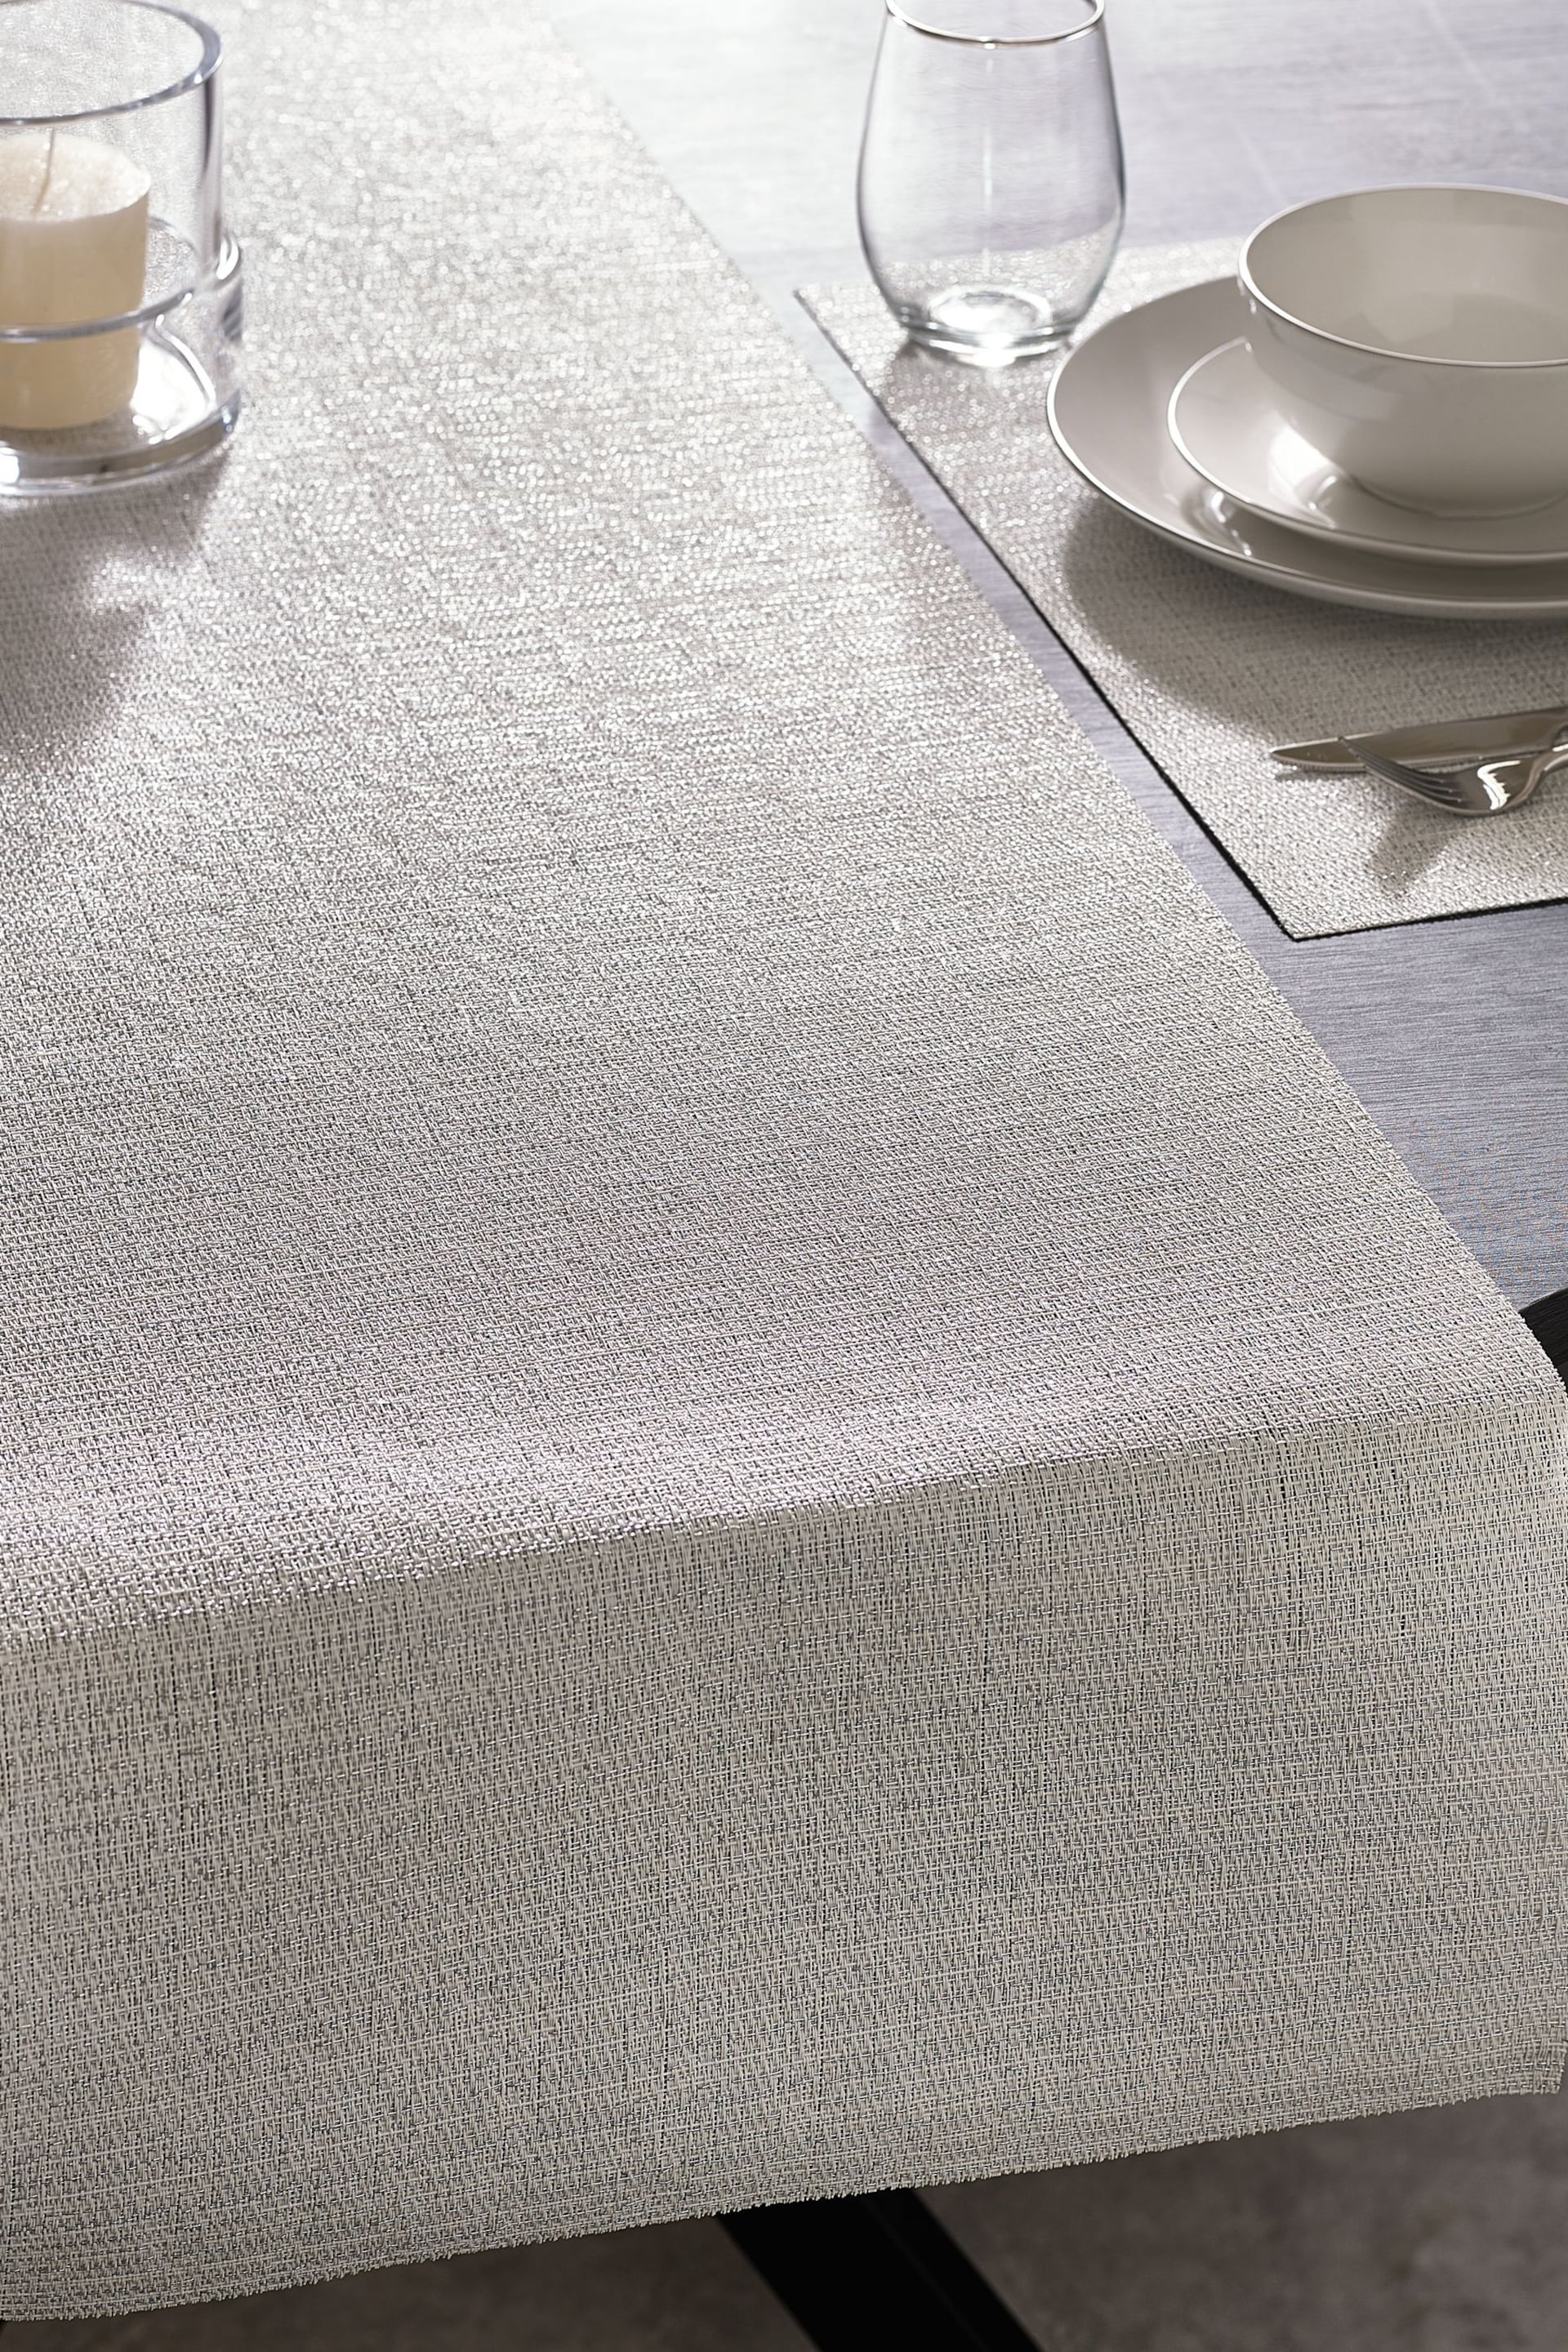 Silver Metallic PVC Wipeclean Kitchen Table Runner - Image 1 of 5